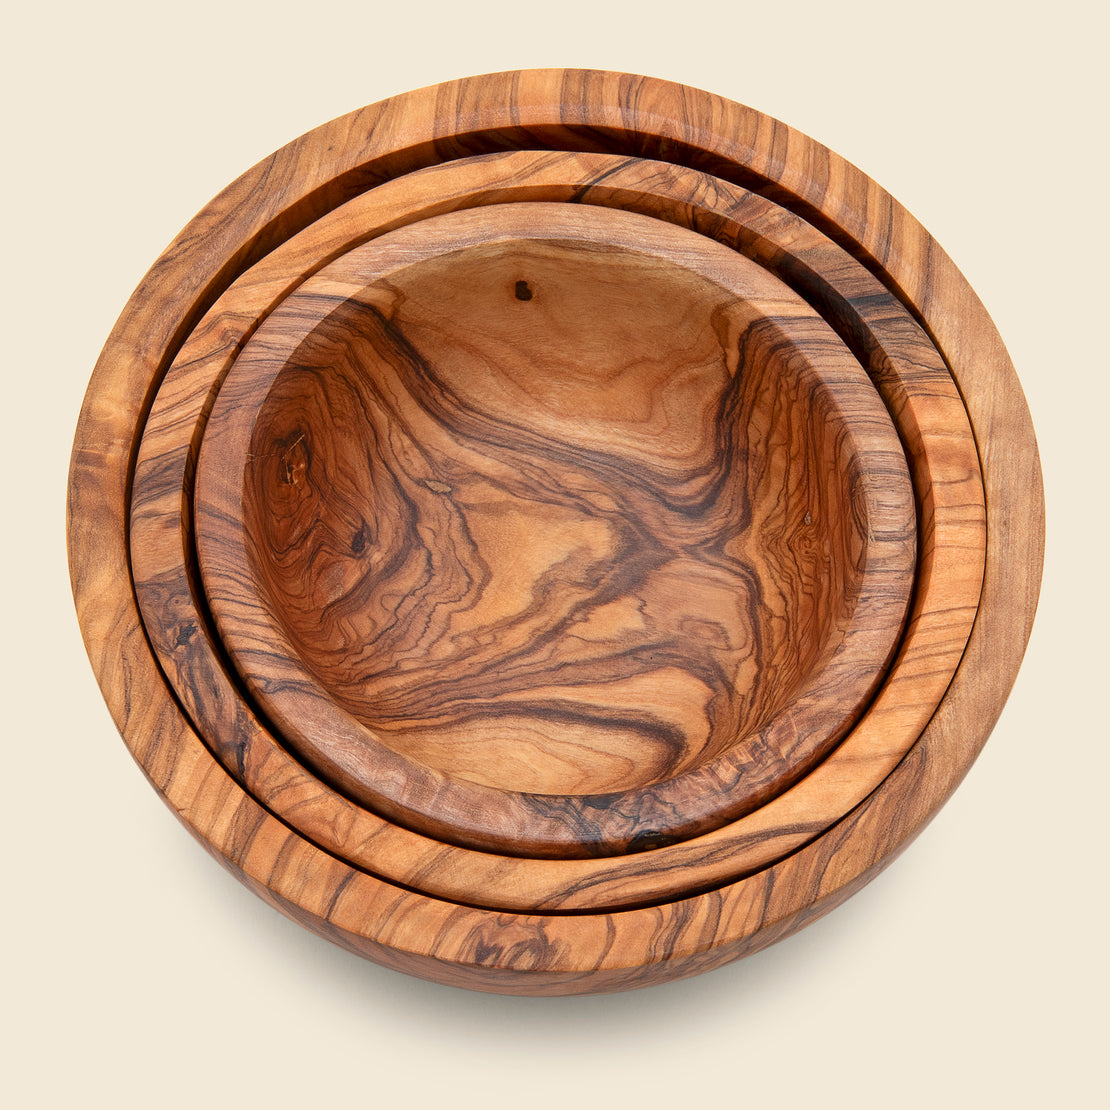 Set of 3 Olive Wood Nesting Bowls - Home - STAG Provisions - Home - Kitchen - Serving